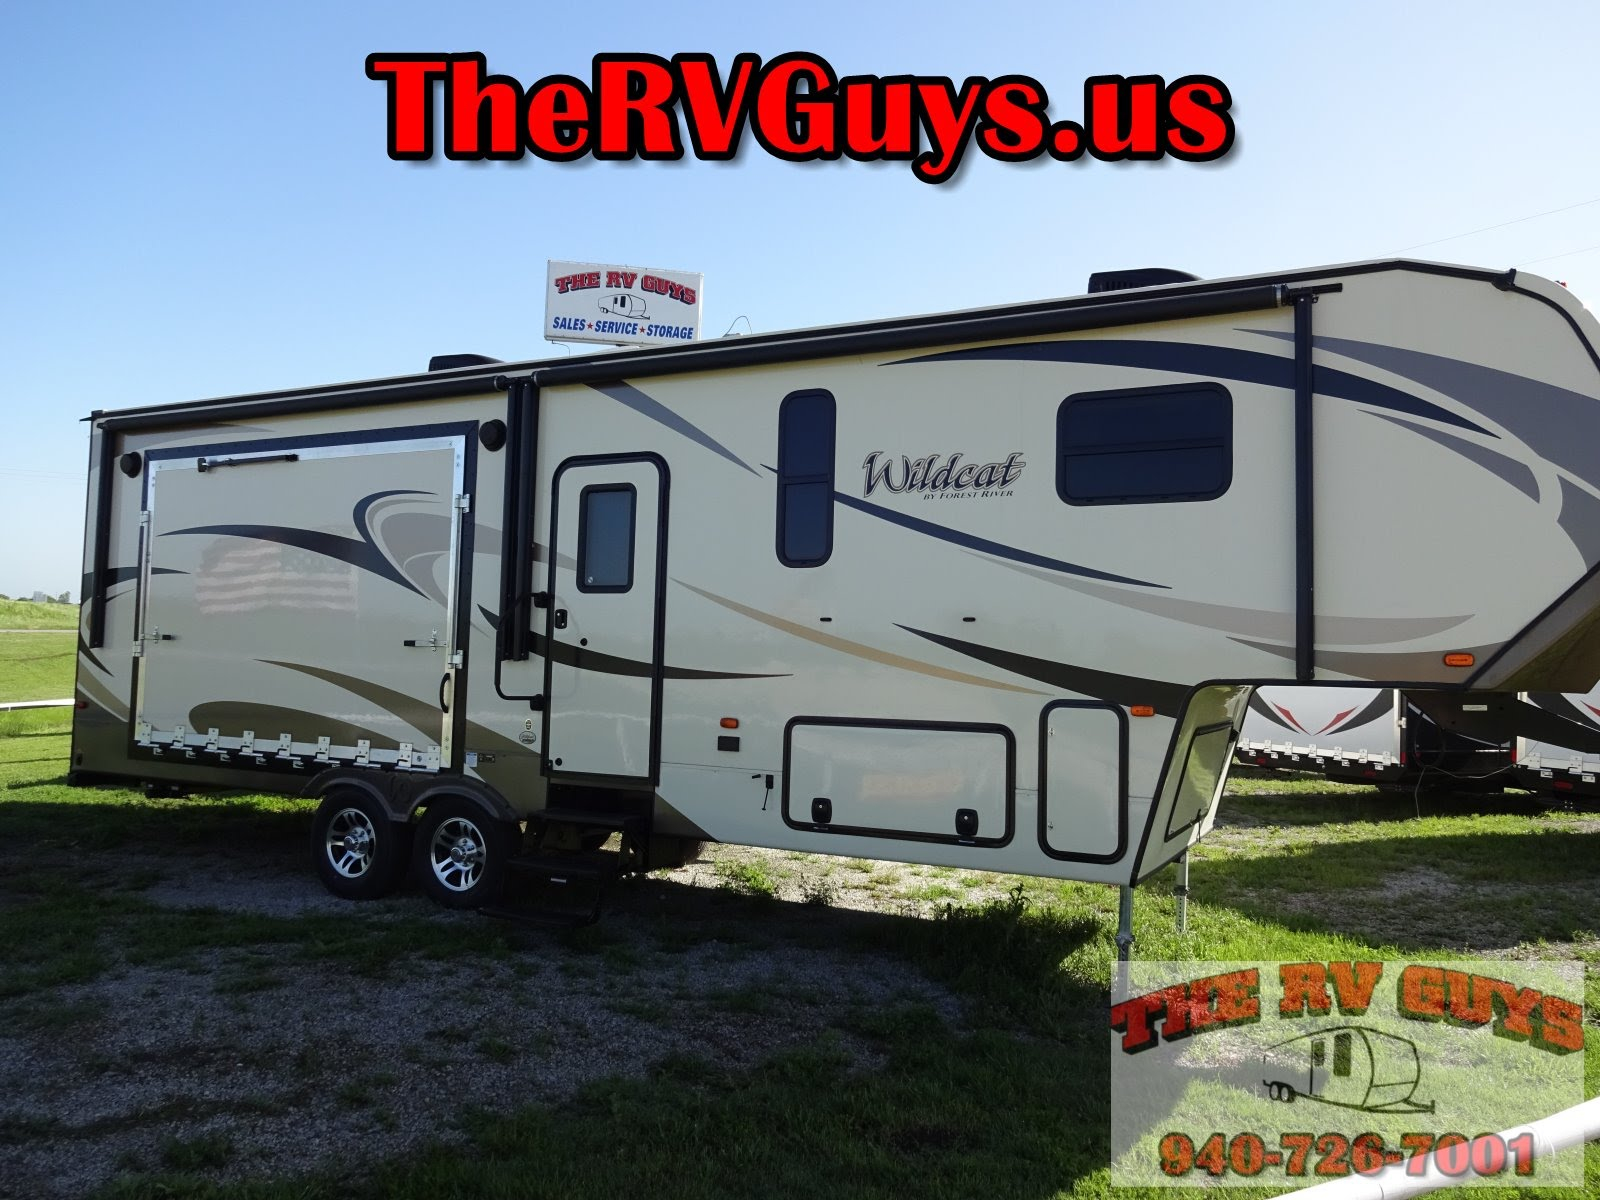 This Cool Residential 5th Wheel Is Complete With Elevated Patio Deck inside sizing 1600 X 1200